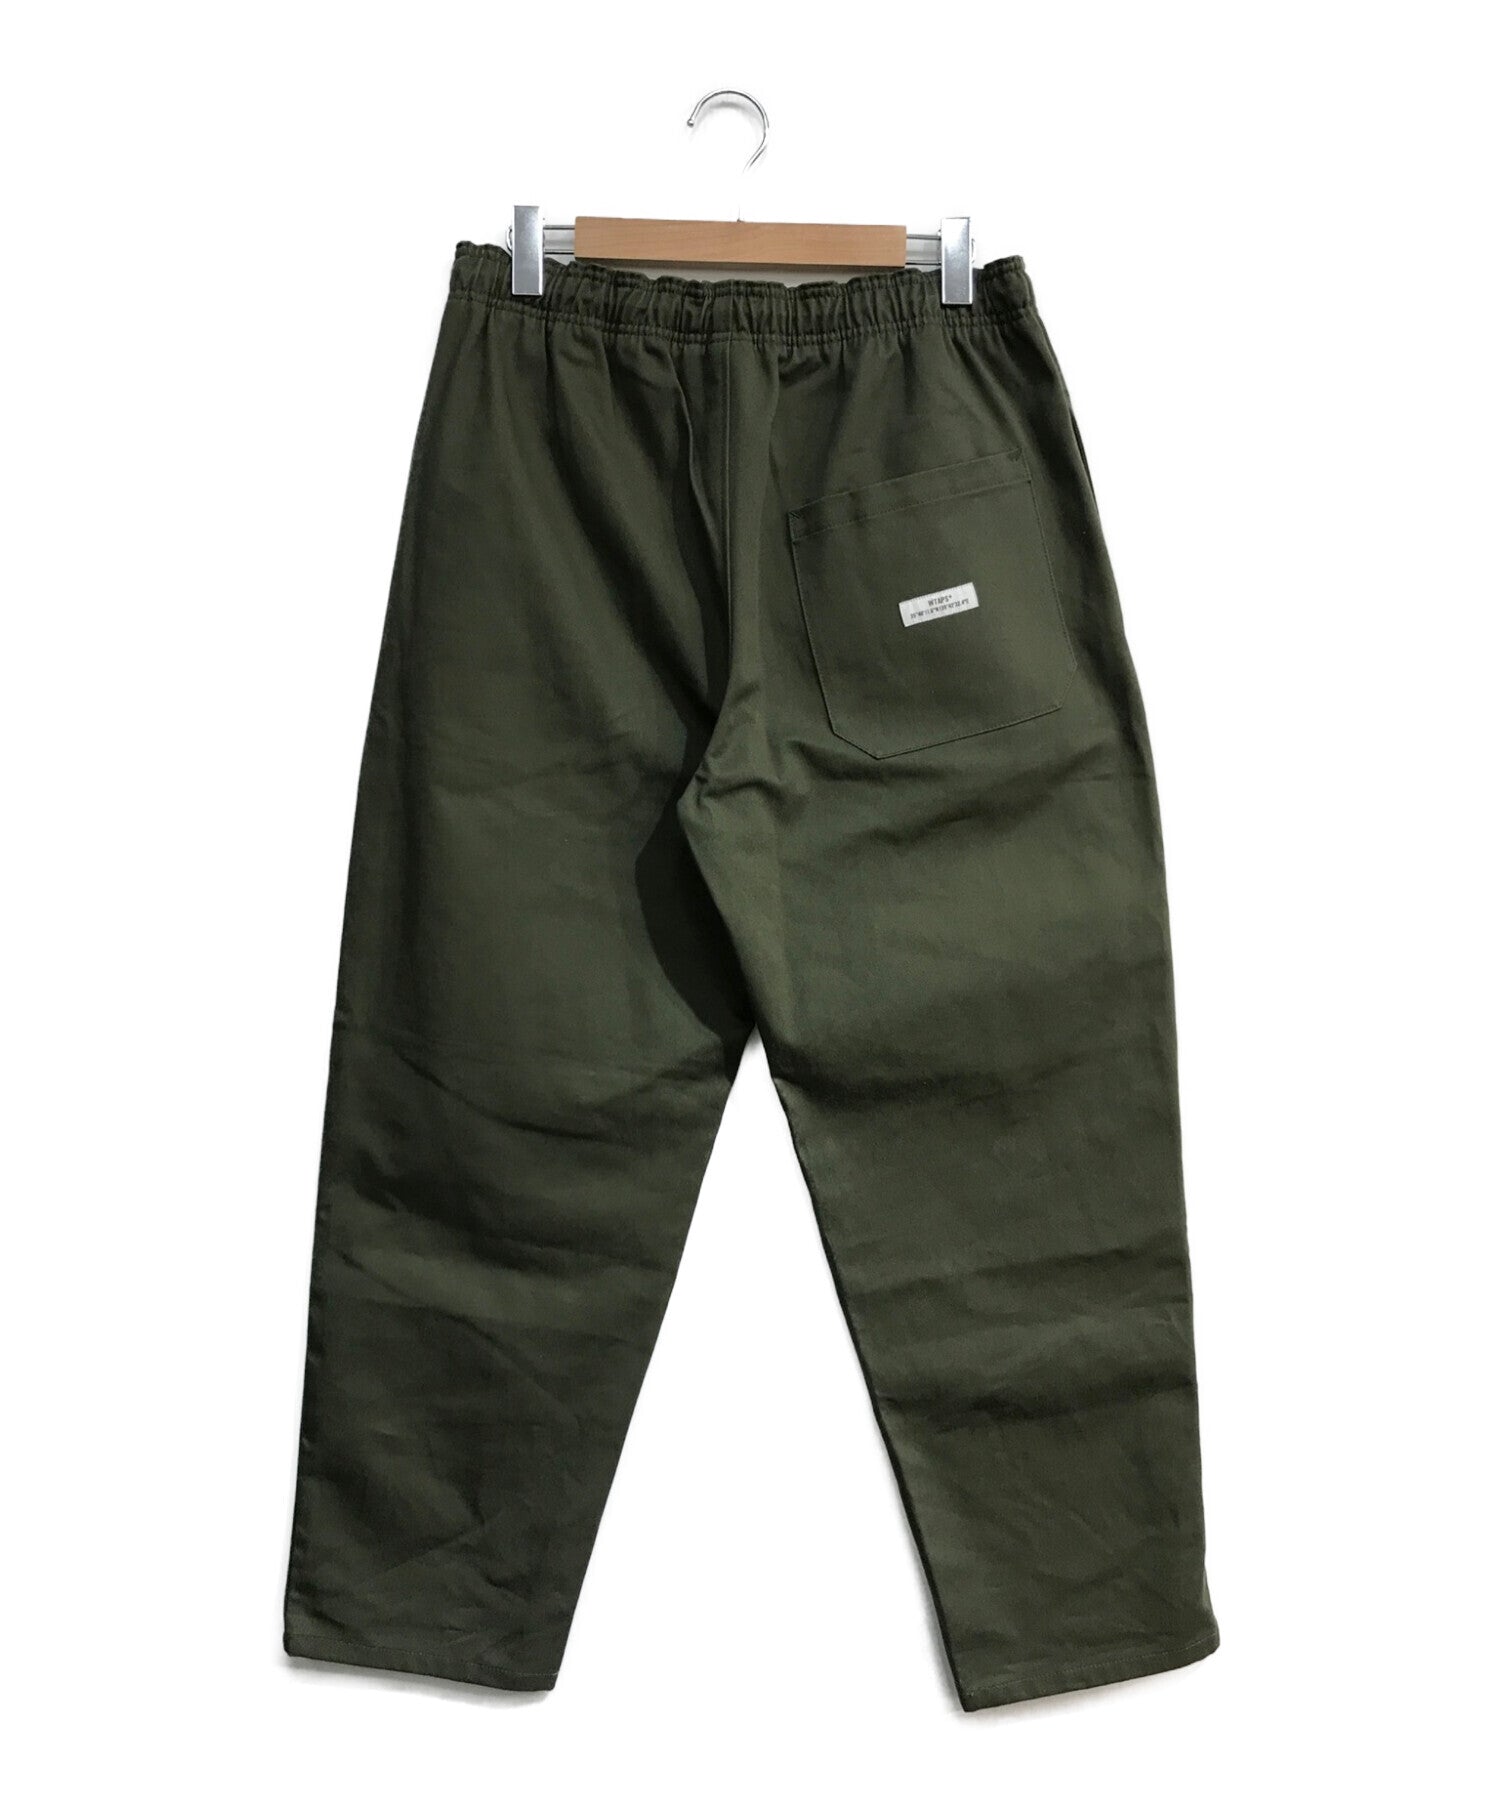 WTAPS seagull 03 trousers cotton twill 212wvdt-ptm08 212wvdt-ptm08